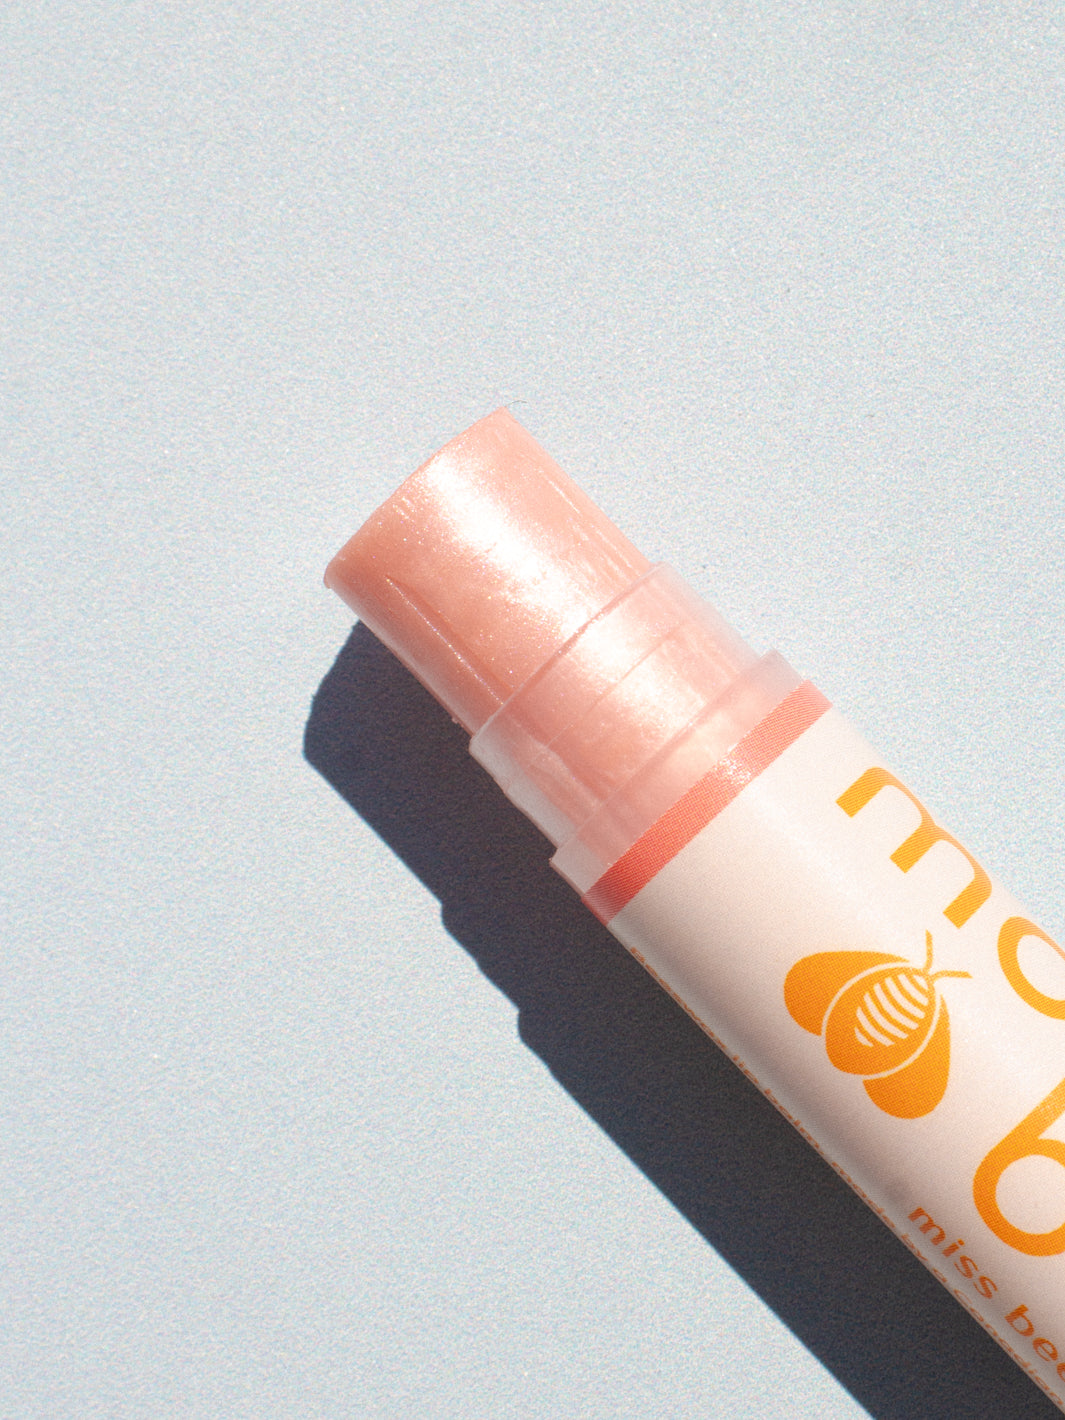 Beeswax Tinted Lip Balm - Now sold in cases of 24